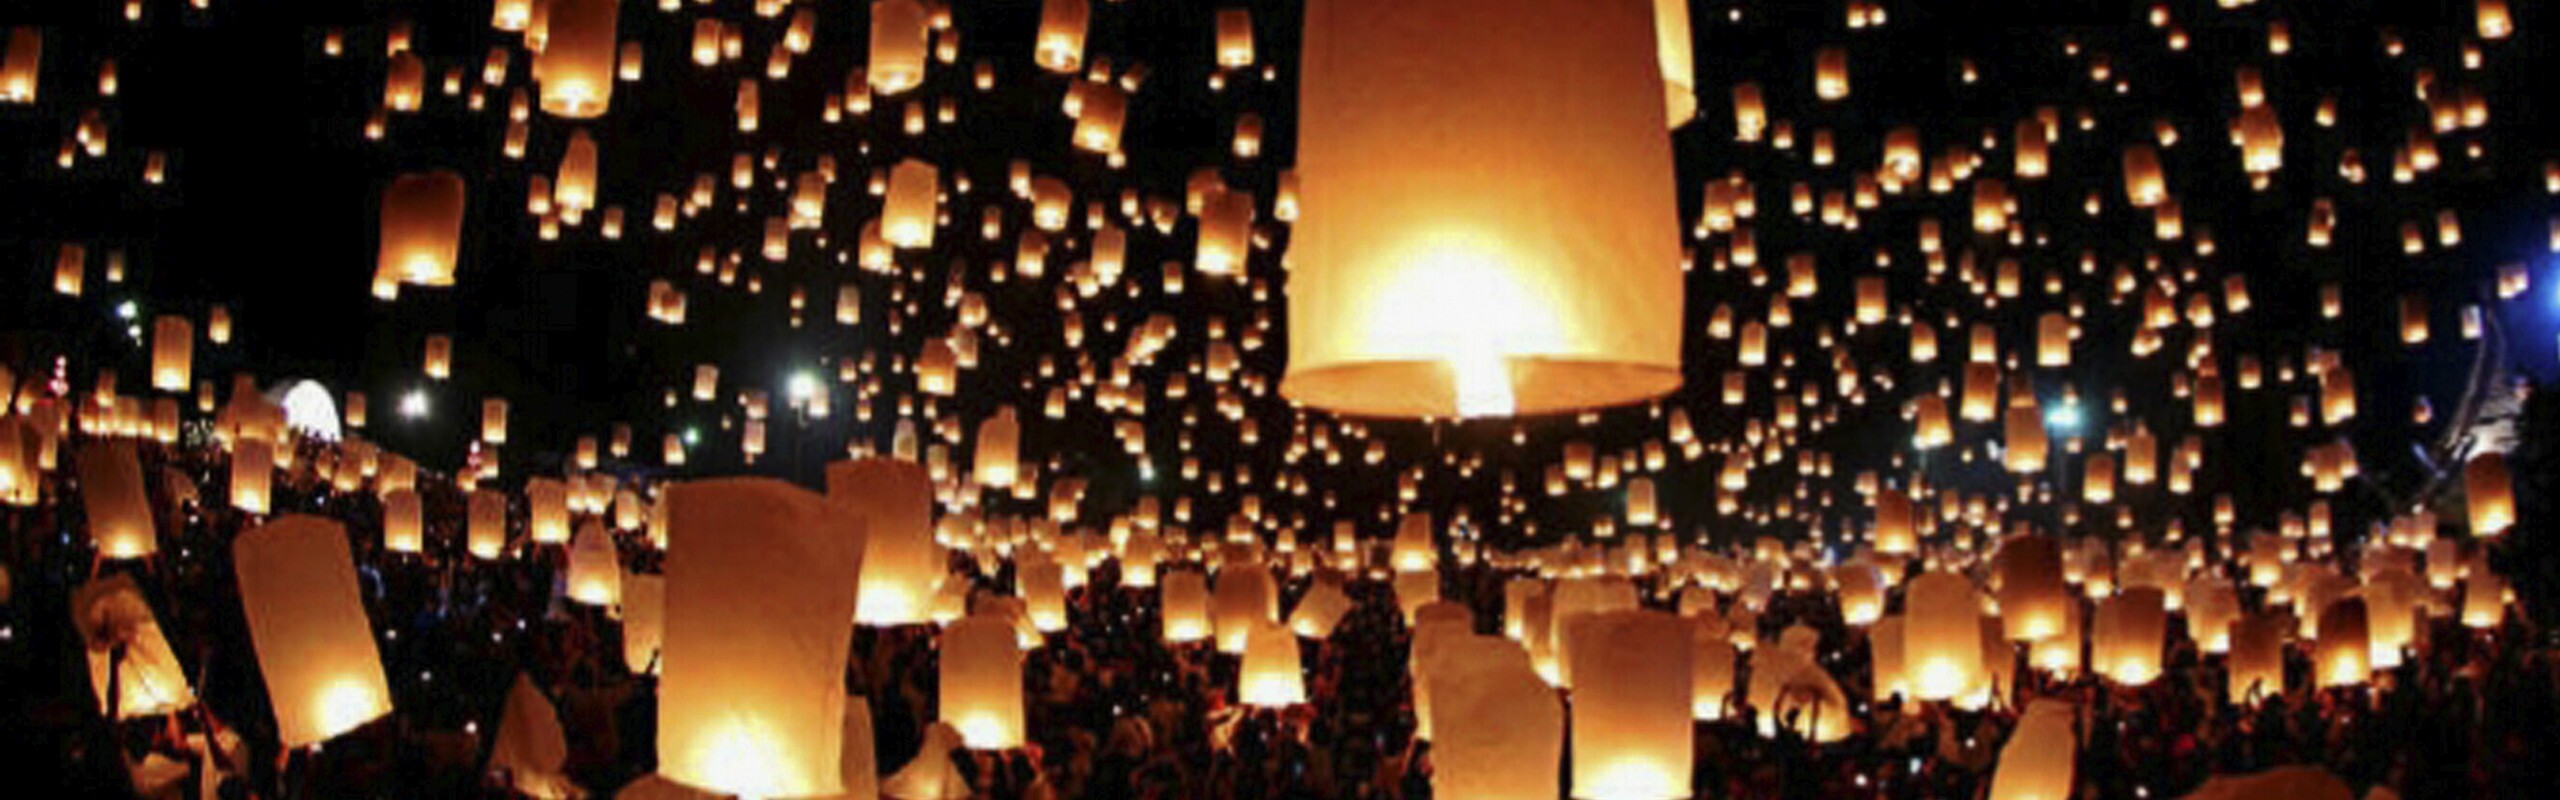 Best Yee Peng Mass Lantern Releases in Chiang Mai, Witness Flying Lanterns in Chiang Mai